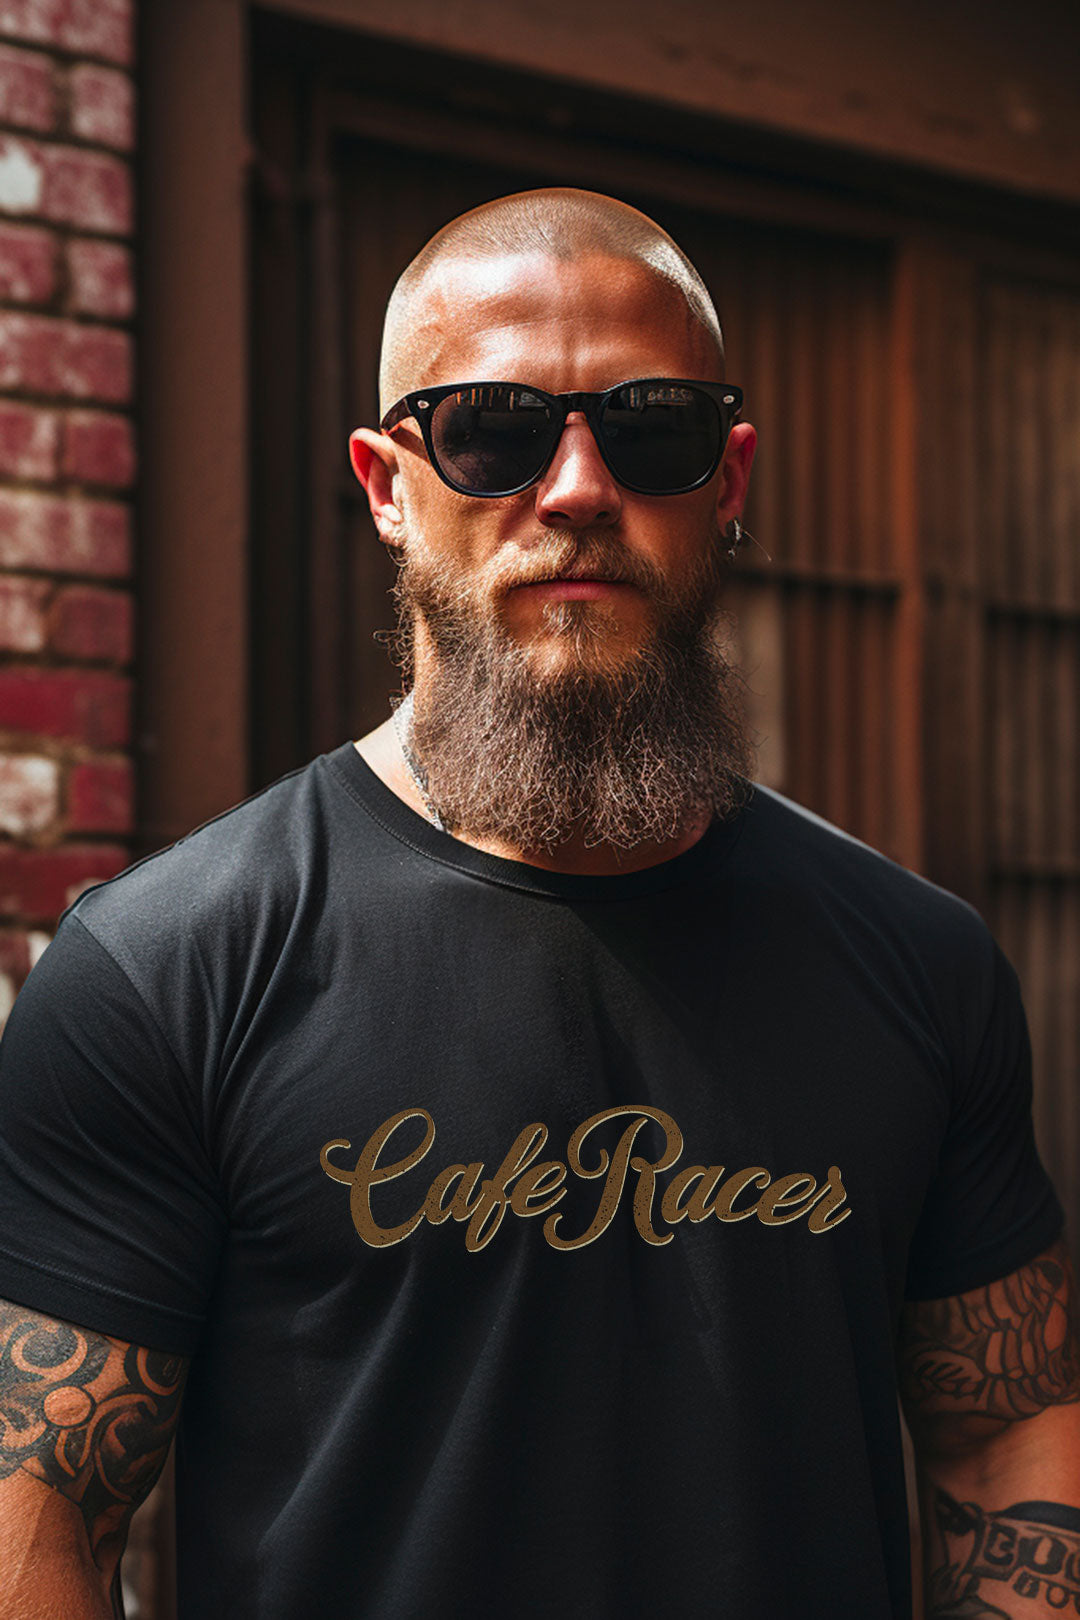 Cafe Racer t-shirt Motorcycle Shirt Cafe Racer Shirt Funny Biker Shirt Motorcycle Gift for Husband from Wife Sportbike Tee Moto Shirt Bobber